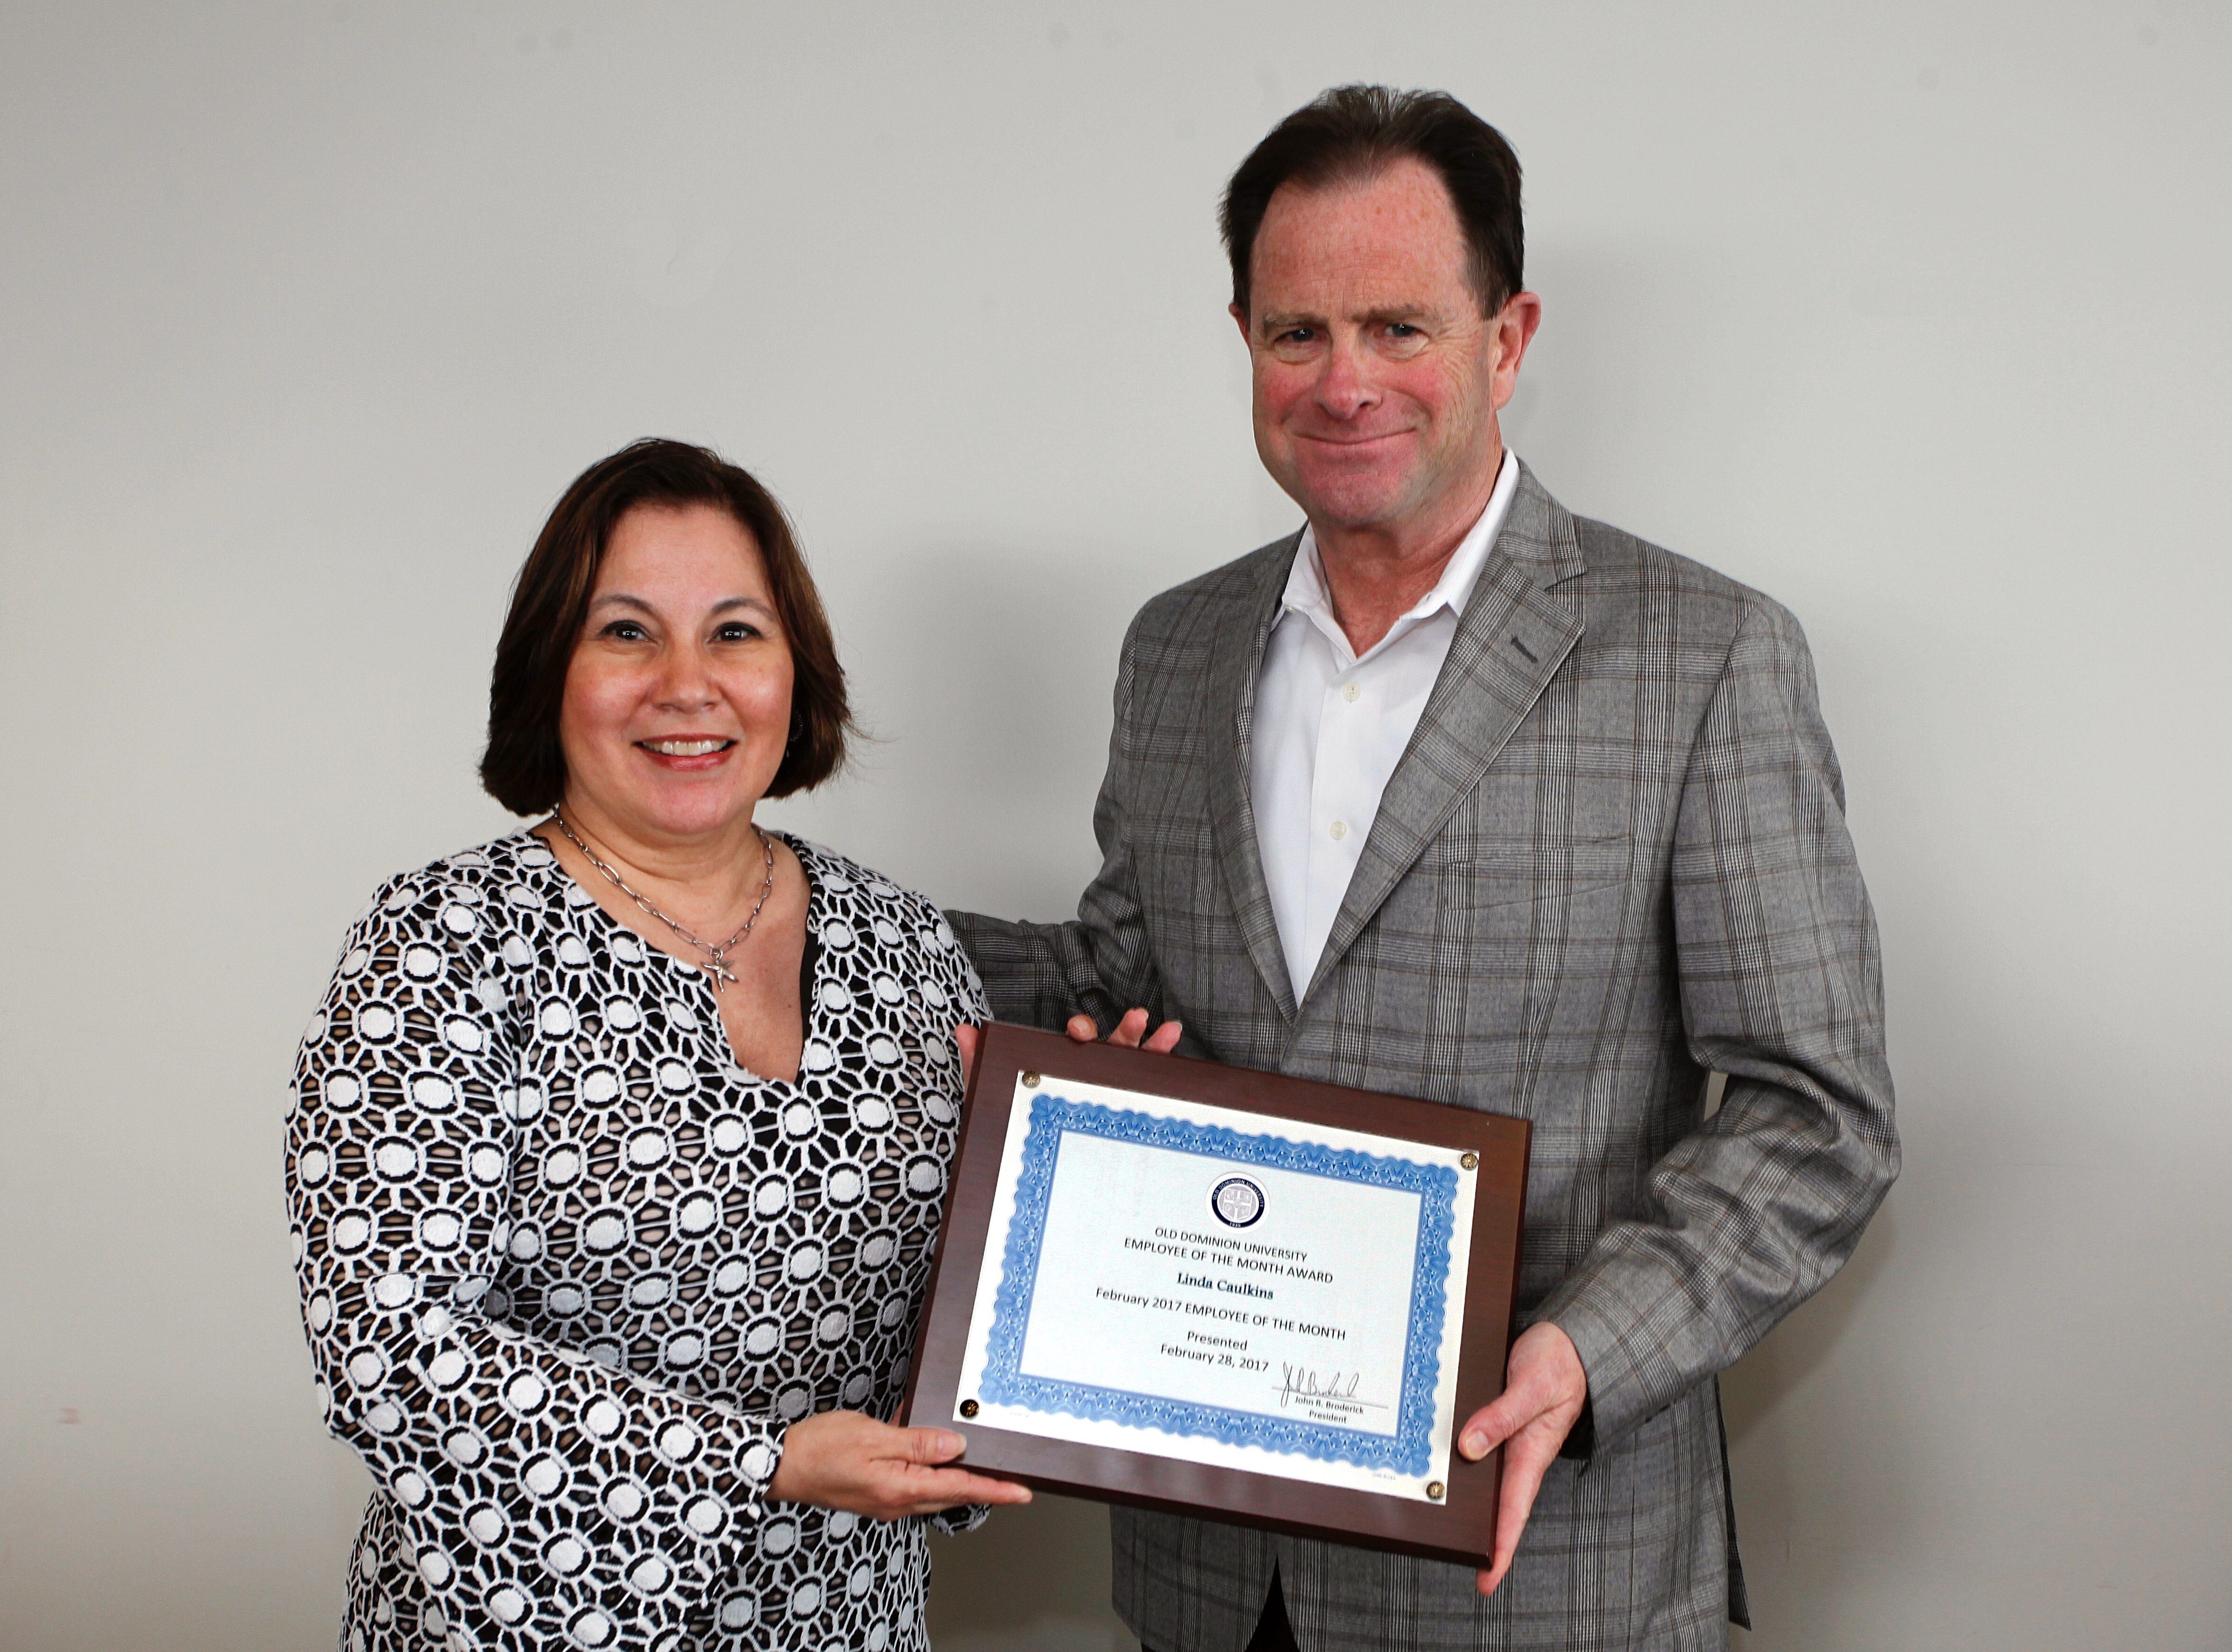 Linda Caulkins receives the Employee of the Month award from Old Dominion President John R. Broderick